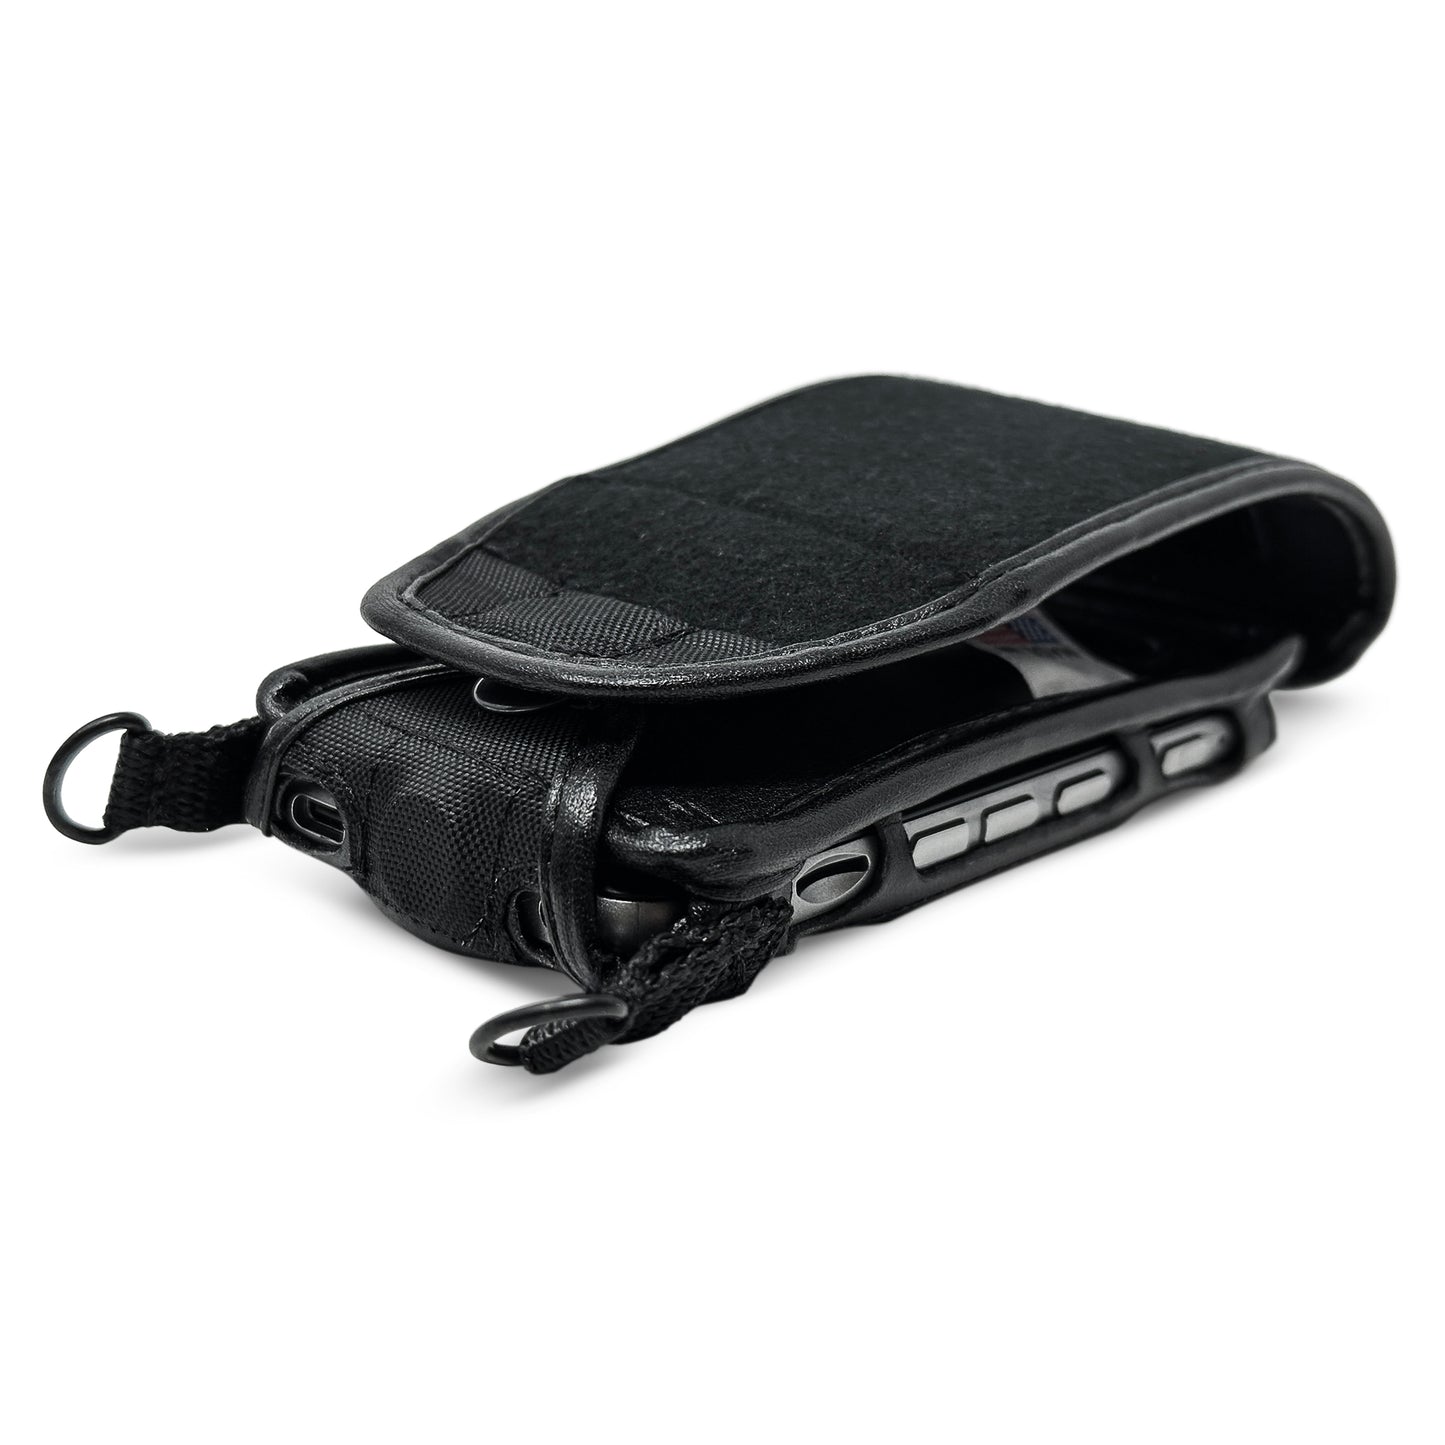 Selvas BLV SensePlayer Fitted Leather Case with straps by Turtleback